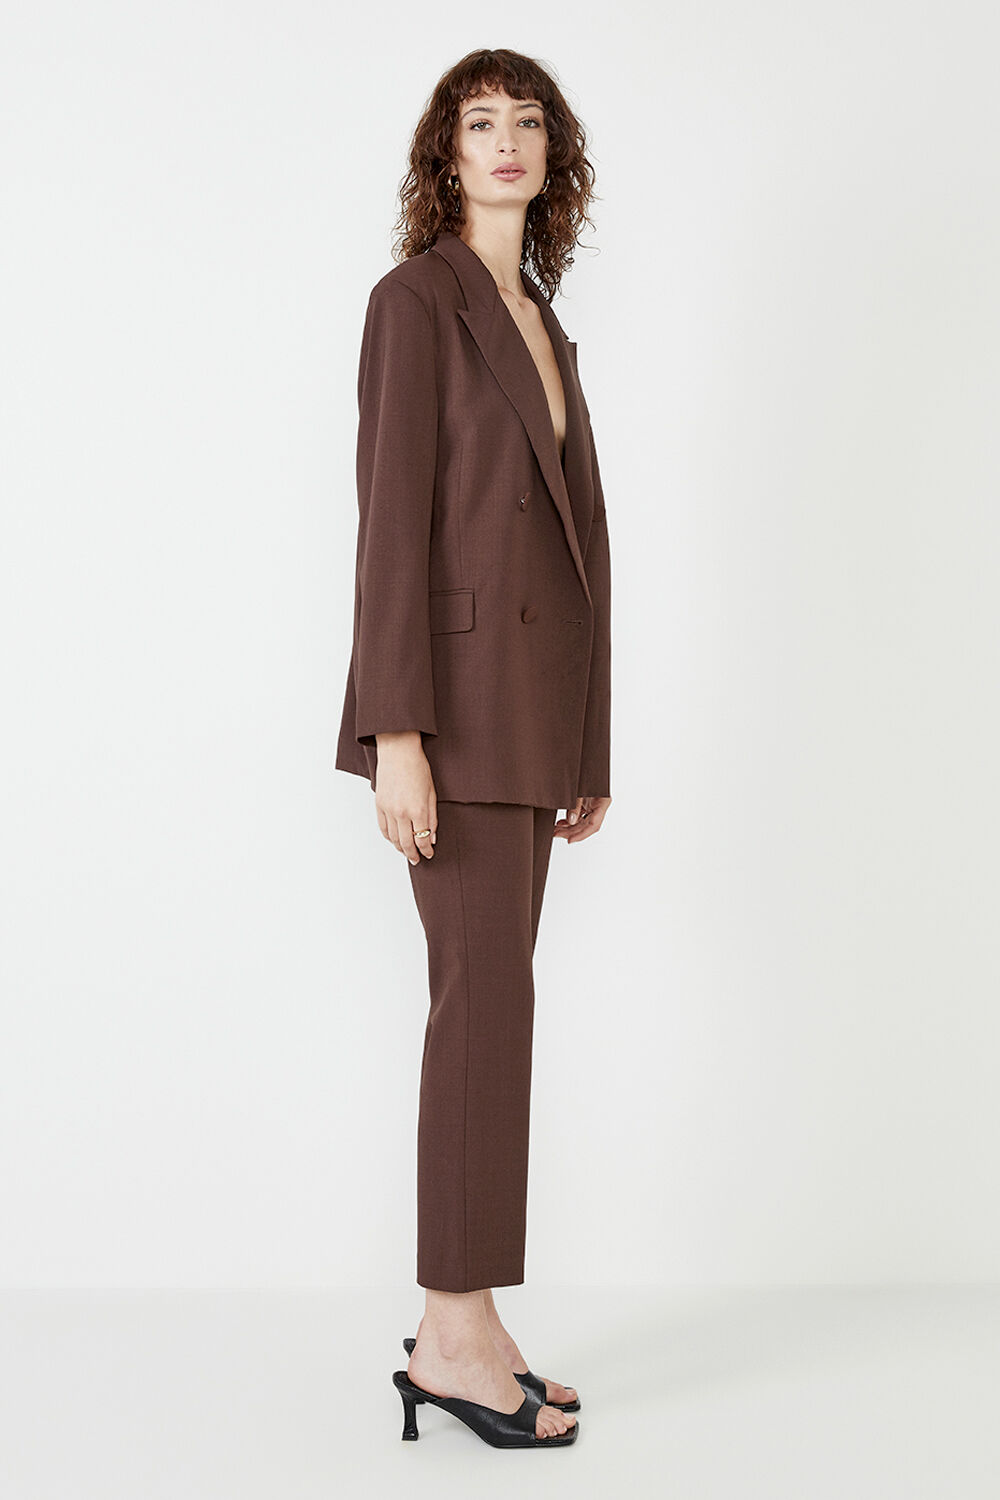 THE OVER SIZED BLAZER in colour BITTER CHOCOLATE